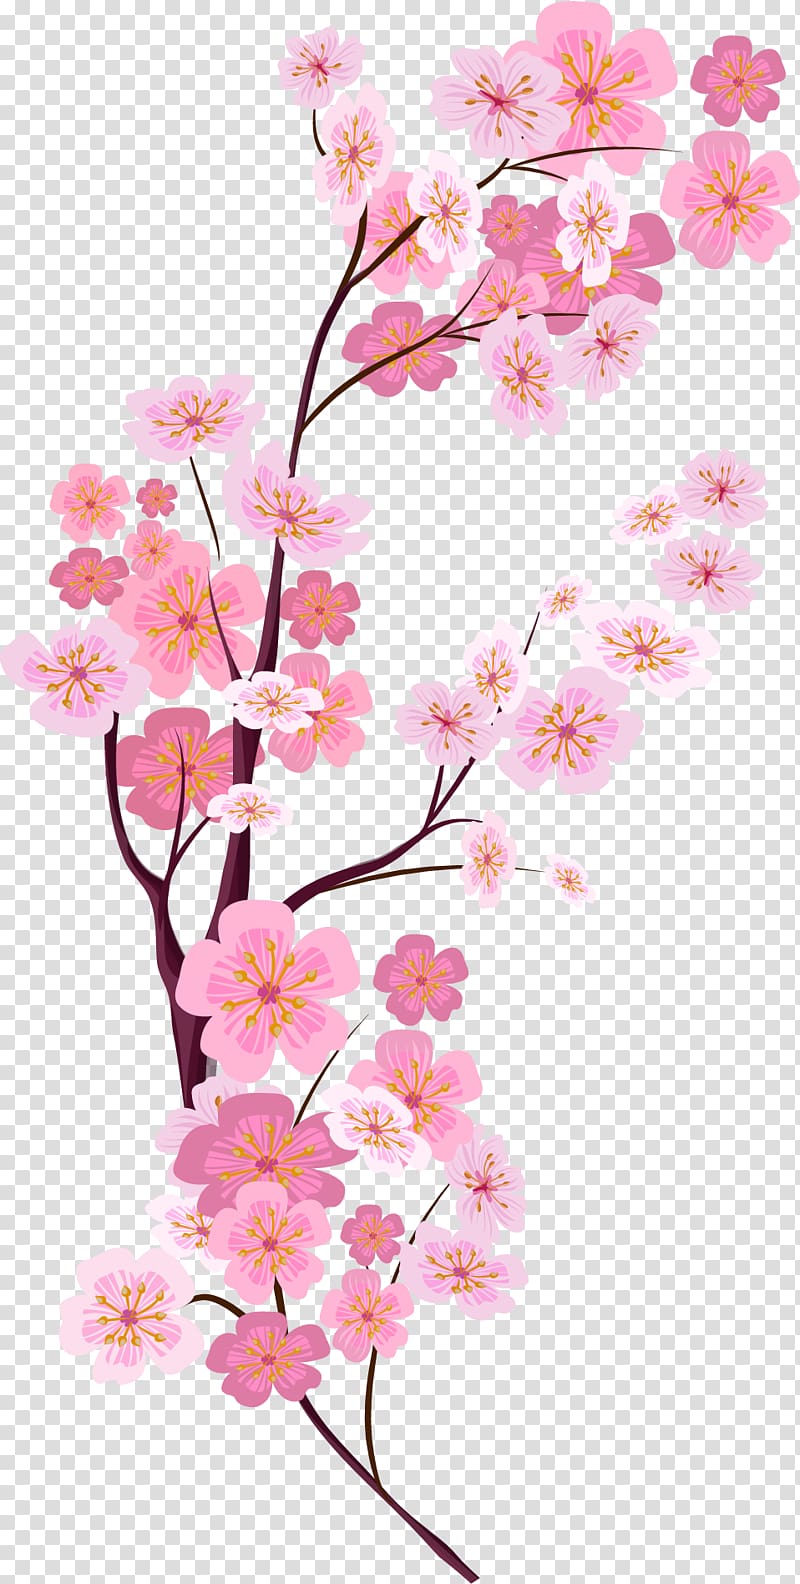 pink cherry blossom illustration, Cherry blossom Euclidean , painted pink cherry blossoms transparent background PNG clipart